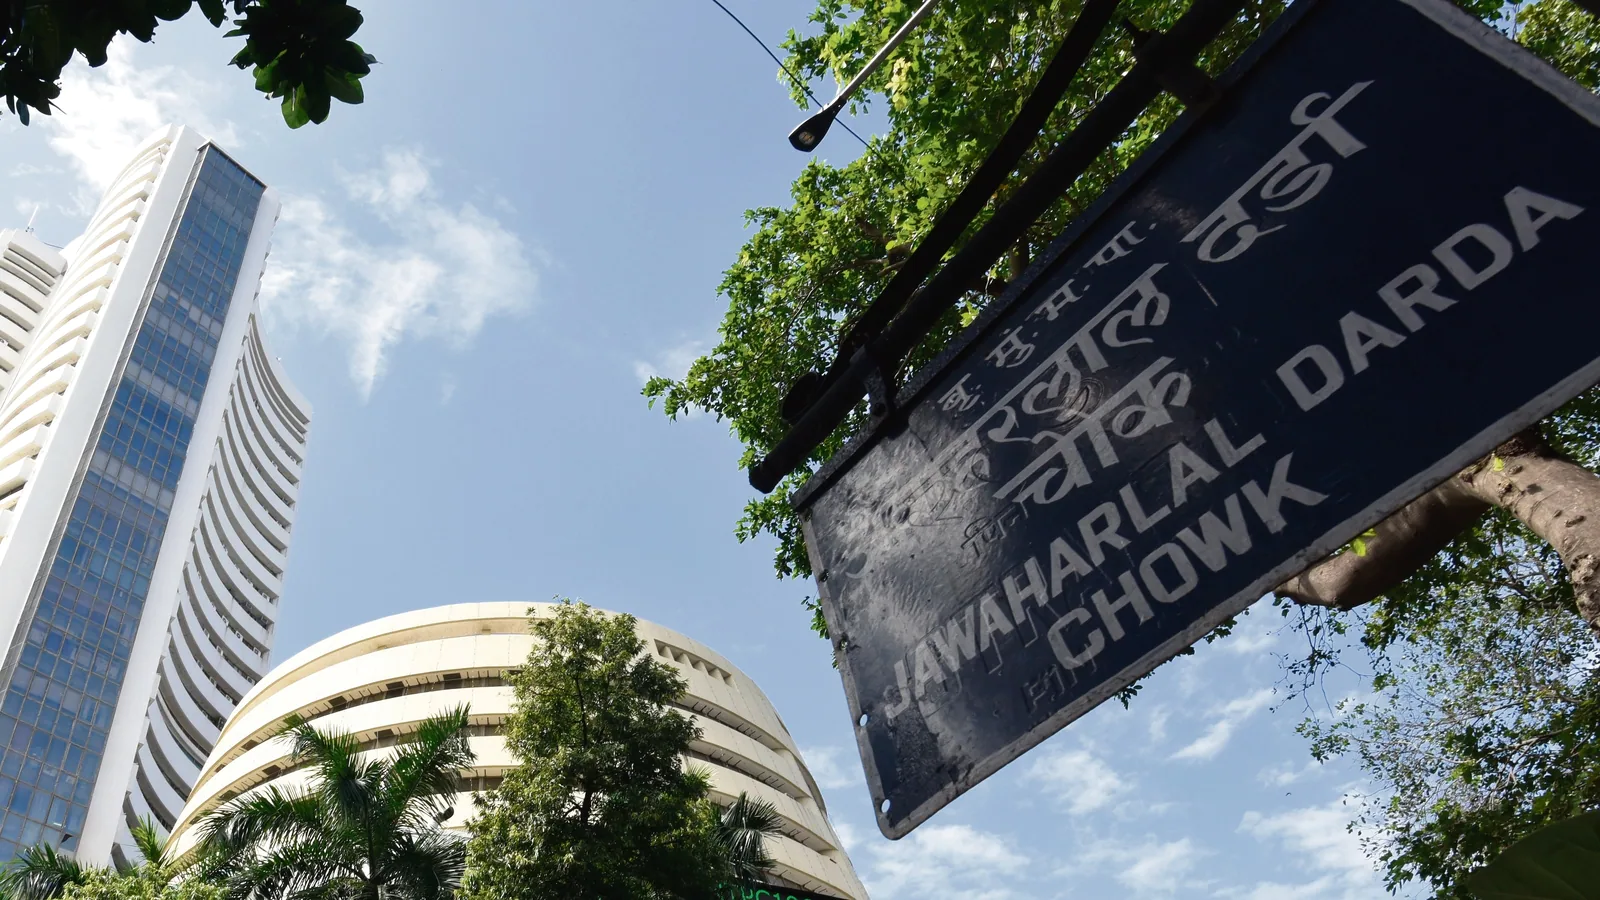 Sensex jumps 303 points to end week at 54,481; Nifty rises to settle at 16,220